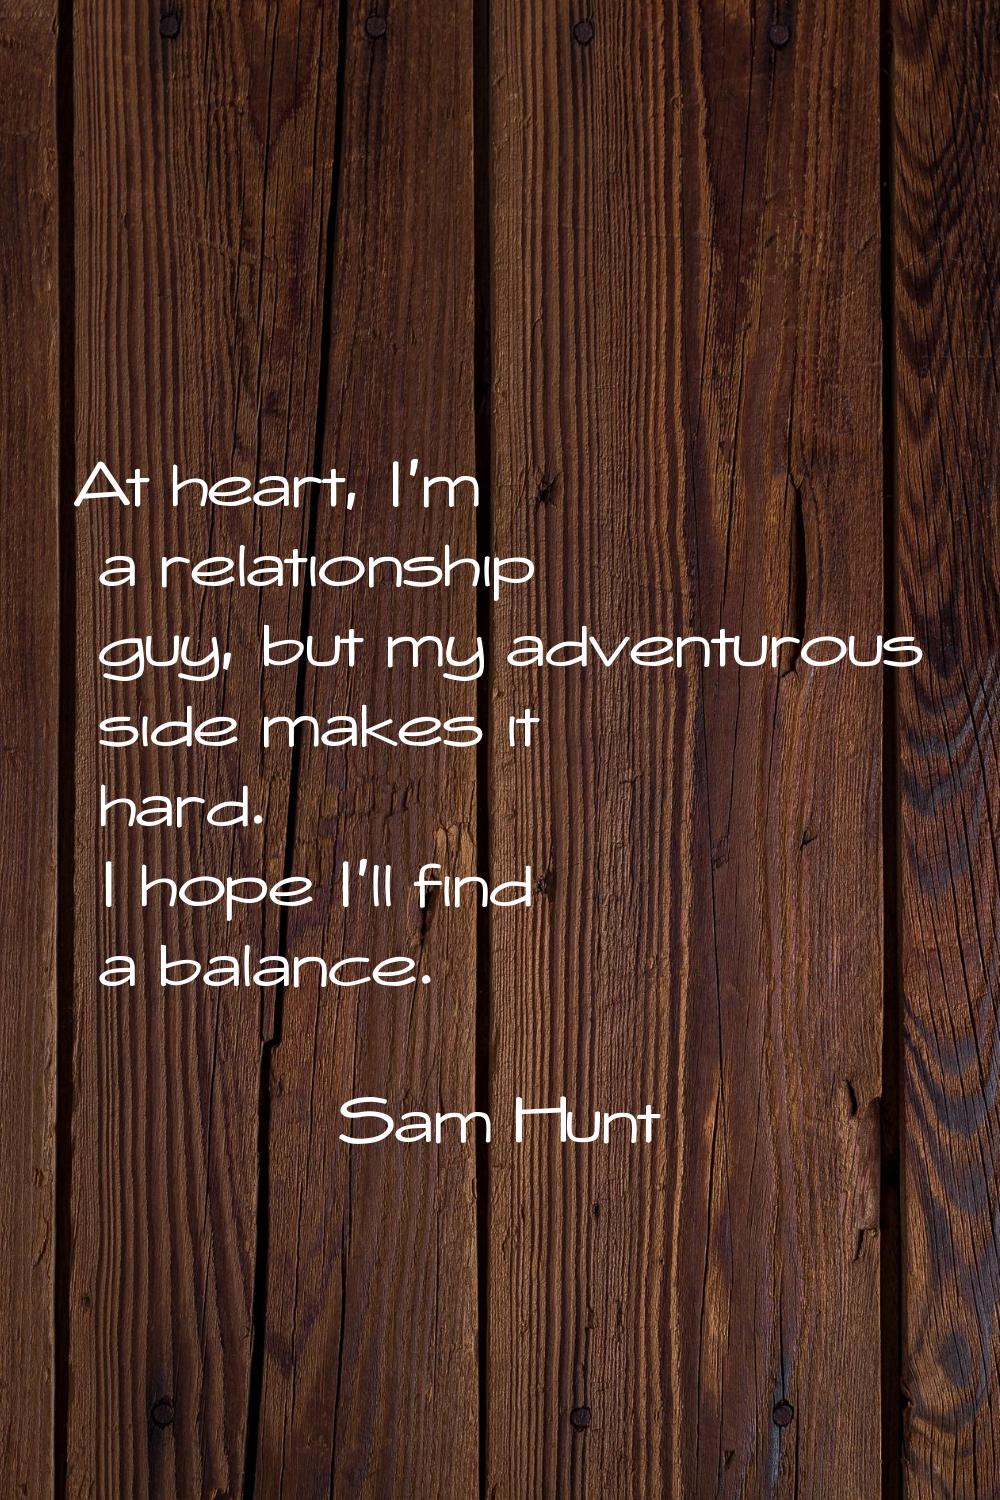 At heart, I'm a relationship guy, but my adventurous side makes it hard. I hope I'll find a balance